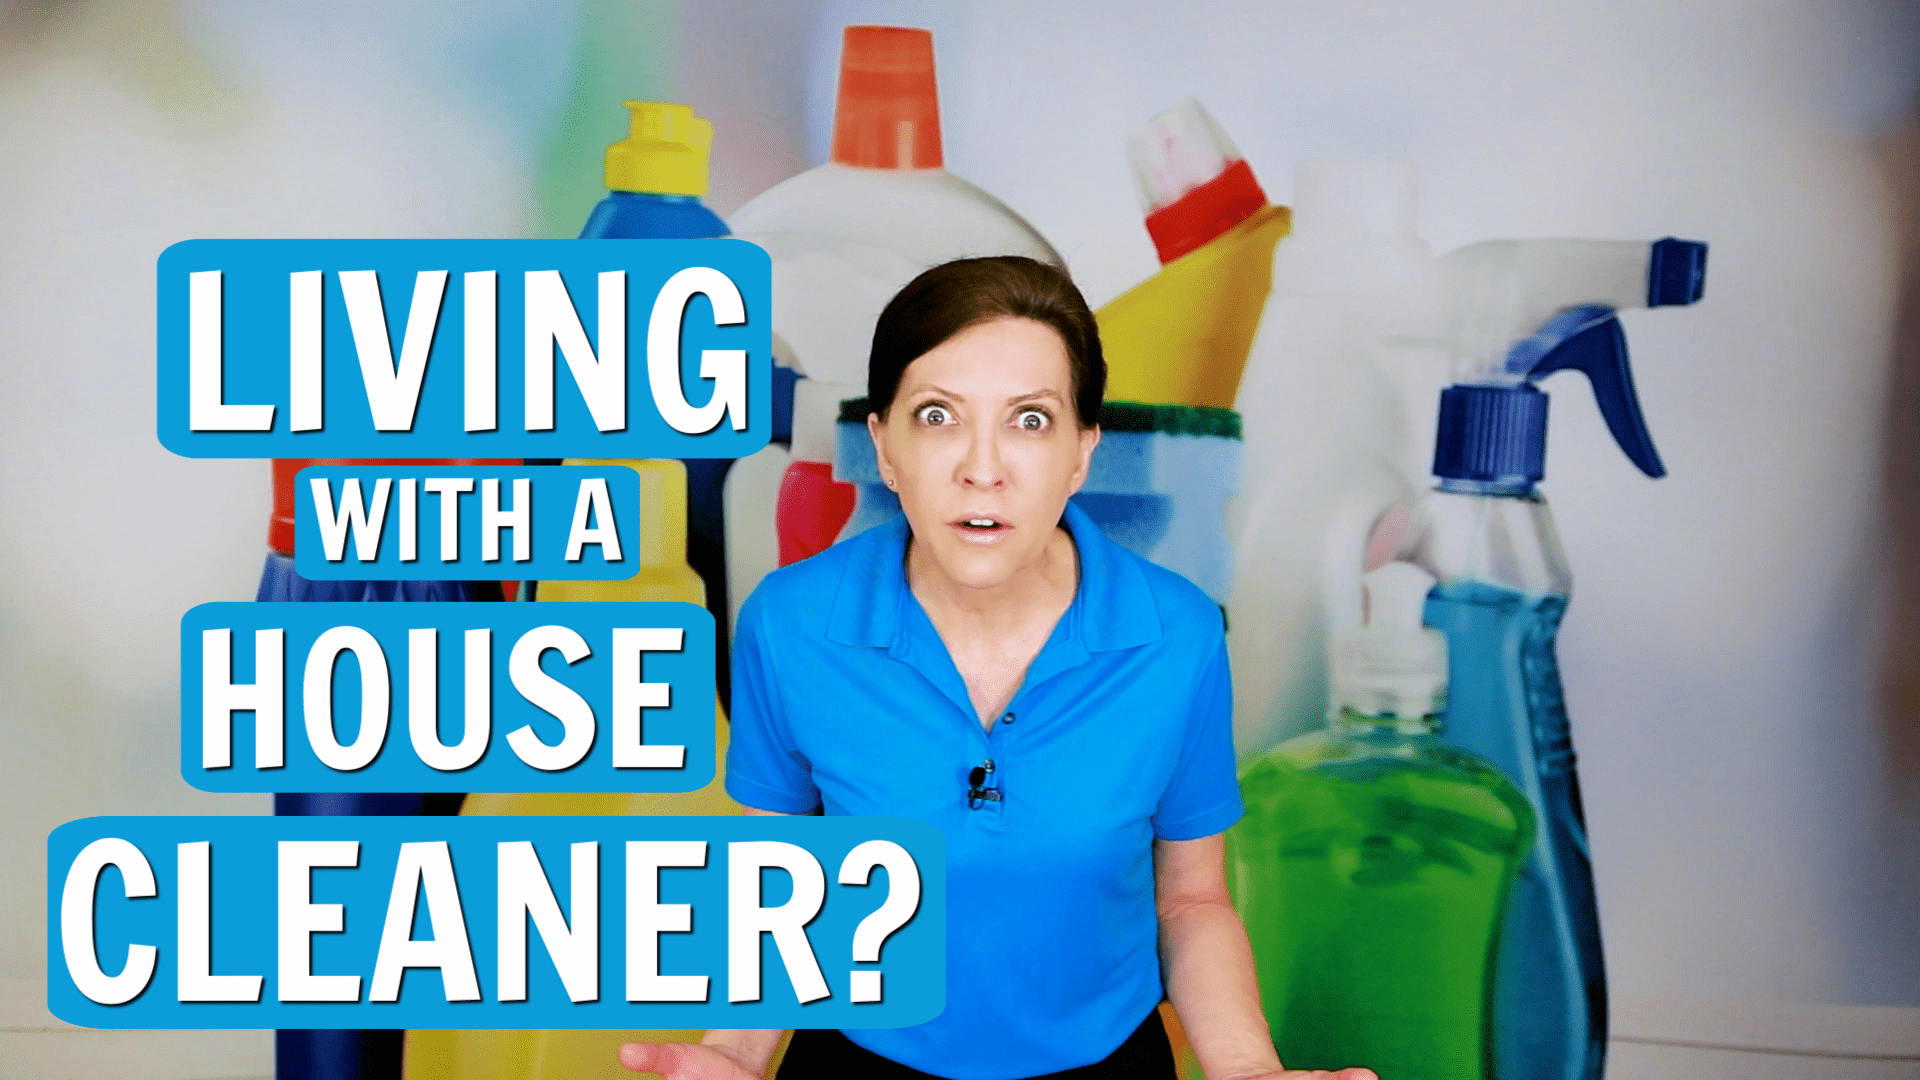 https://askahousecleaner.com/wp-content/uploads/2020/11/1015-What-is-It-Like-Living-With-a-House-Cleaner-Angela-Brown-Savvy-Cleaner.png